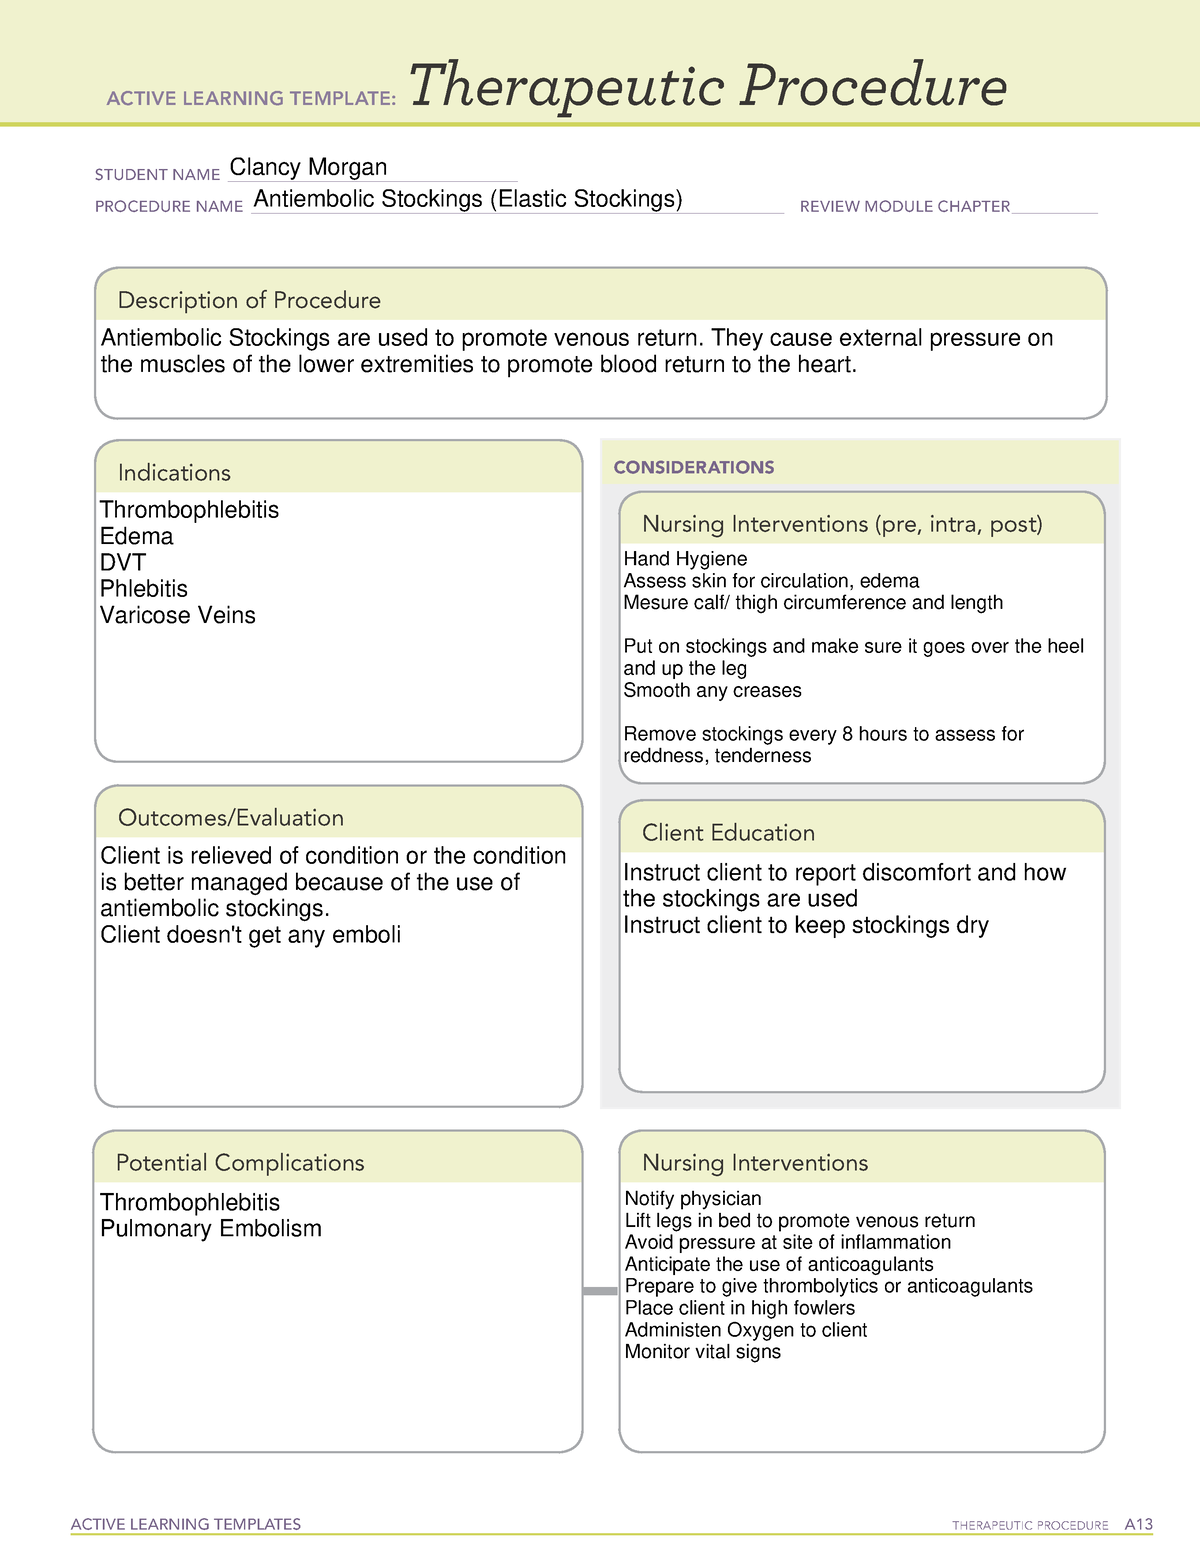 antiembolic-stockings-alt-active-learning-templates-therapeutic